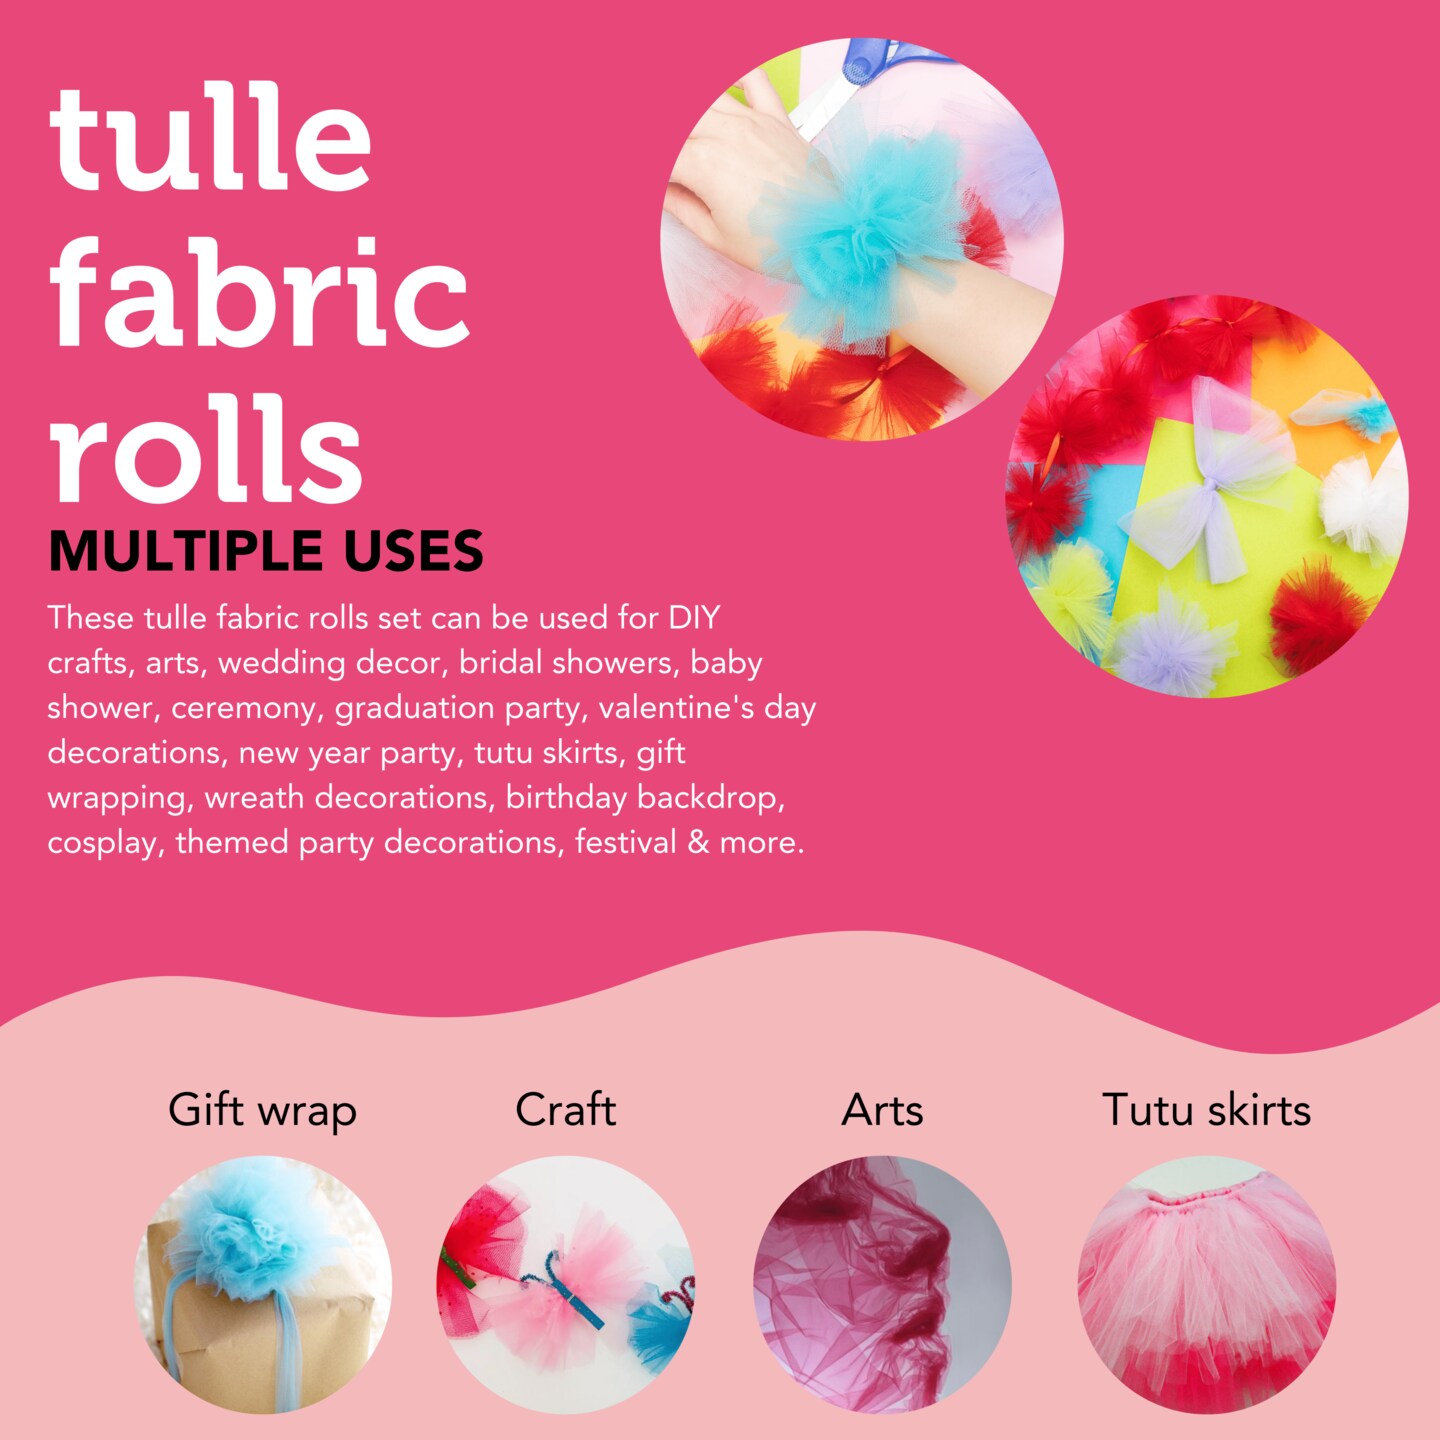 Incraftables Tulle Fabric 6 Rolls (25 Yards per Roll). Best Tulle Ribbon for Gift Wrapping, Wedding Decor, Party Decorations &#x26; Crafts (Rainbow Colors - Red, Black, White, Purple, Green &#x26; Aqua Blue)